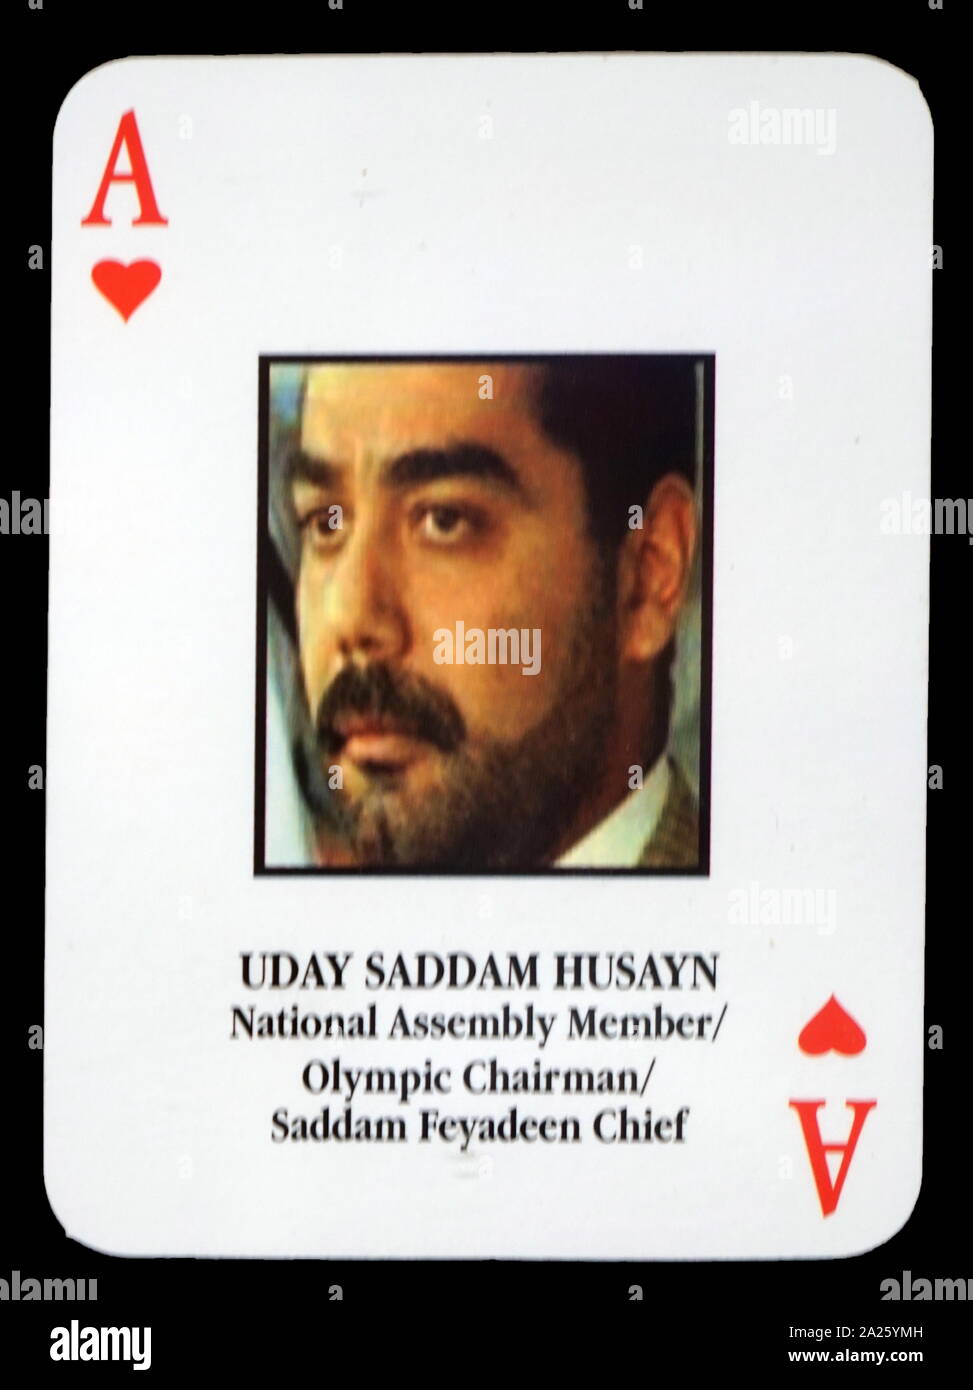 Most-wanted Iraqi playing cards - Uday Saddam Husayn (National Assembly Member/Olympic Chairman/ Saddam Feyadeen Chief). The U.S. military developed a set of playing cards to help troop identify the most-wanted members of President Saddam Hussein's government during the 2003 invasion of Iraq. Stock Photo